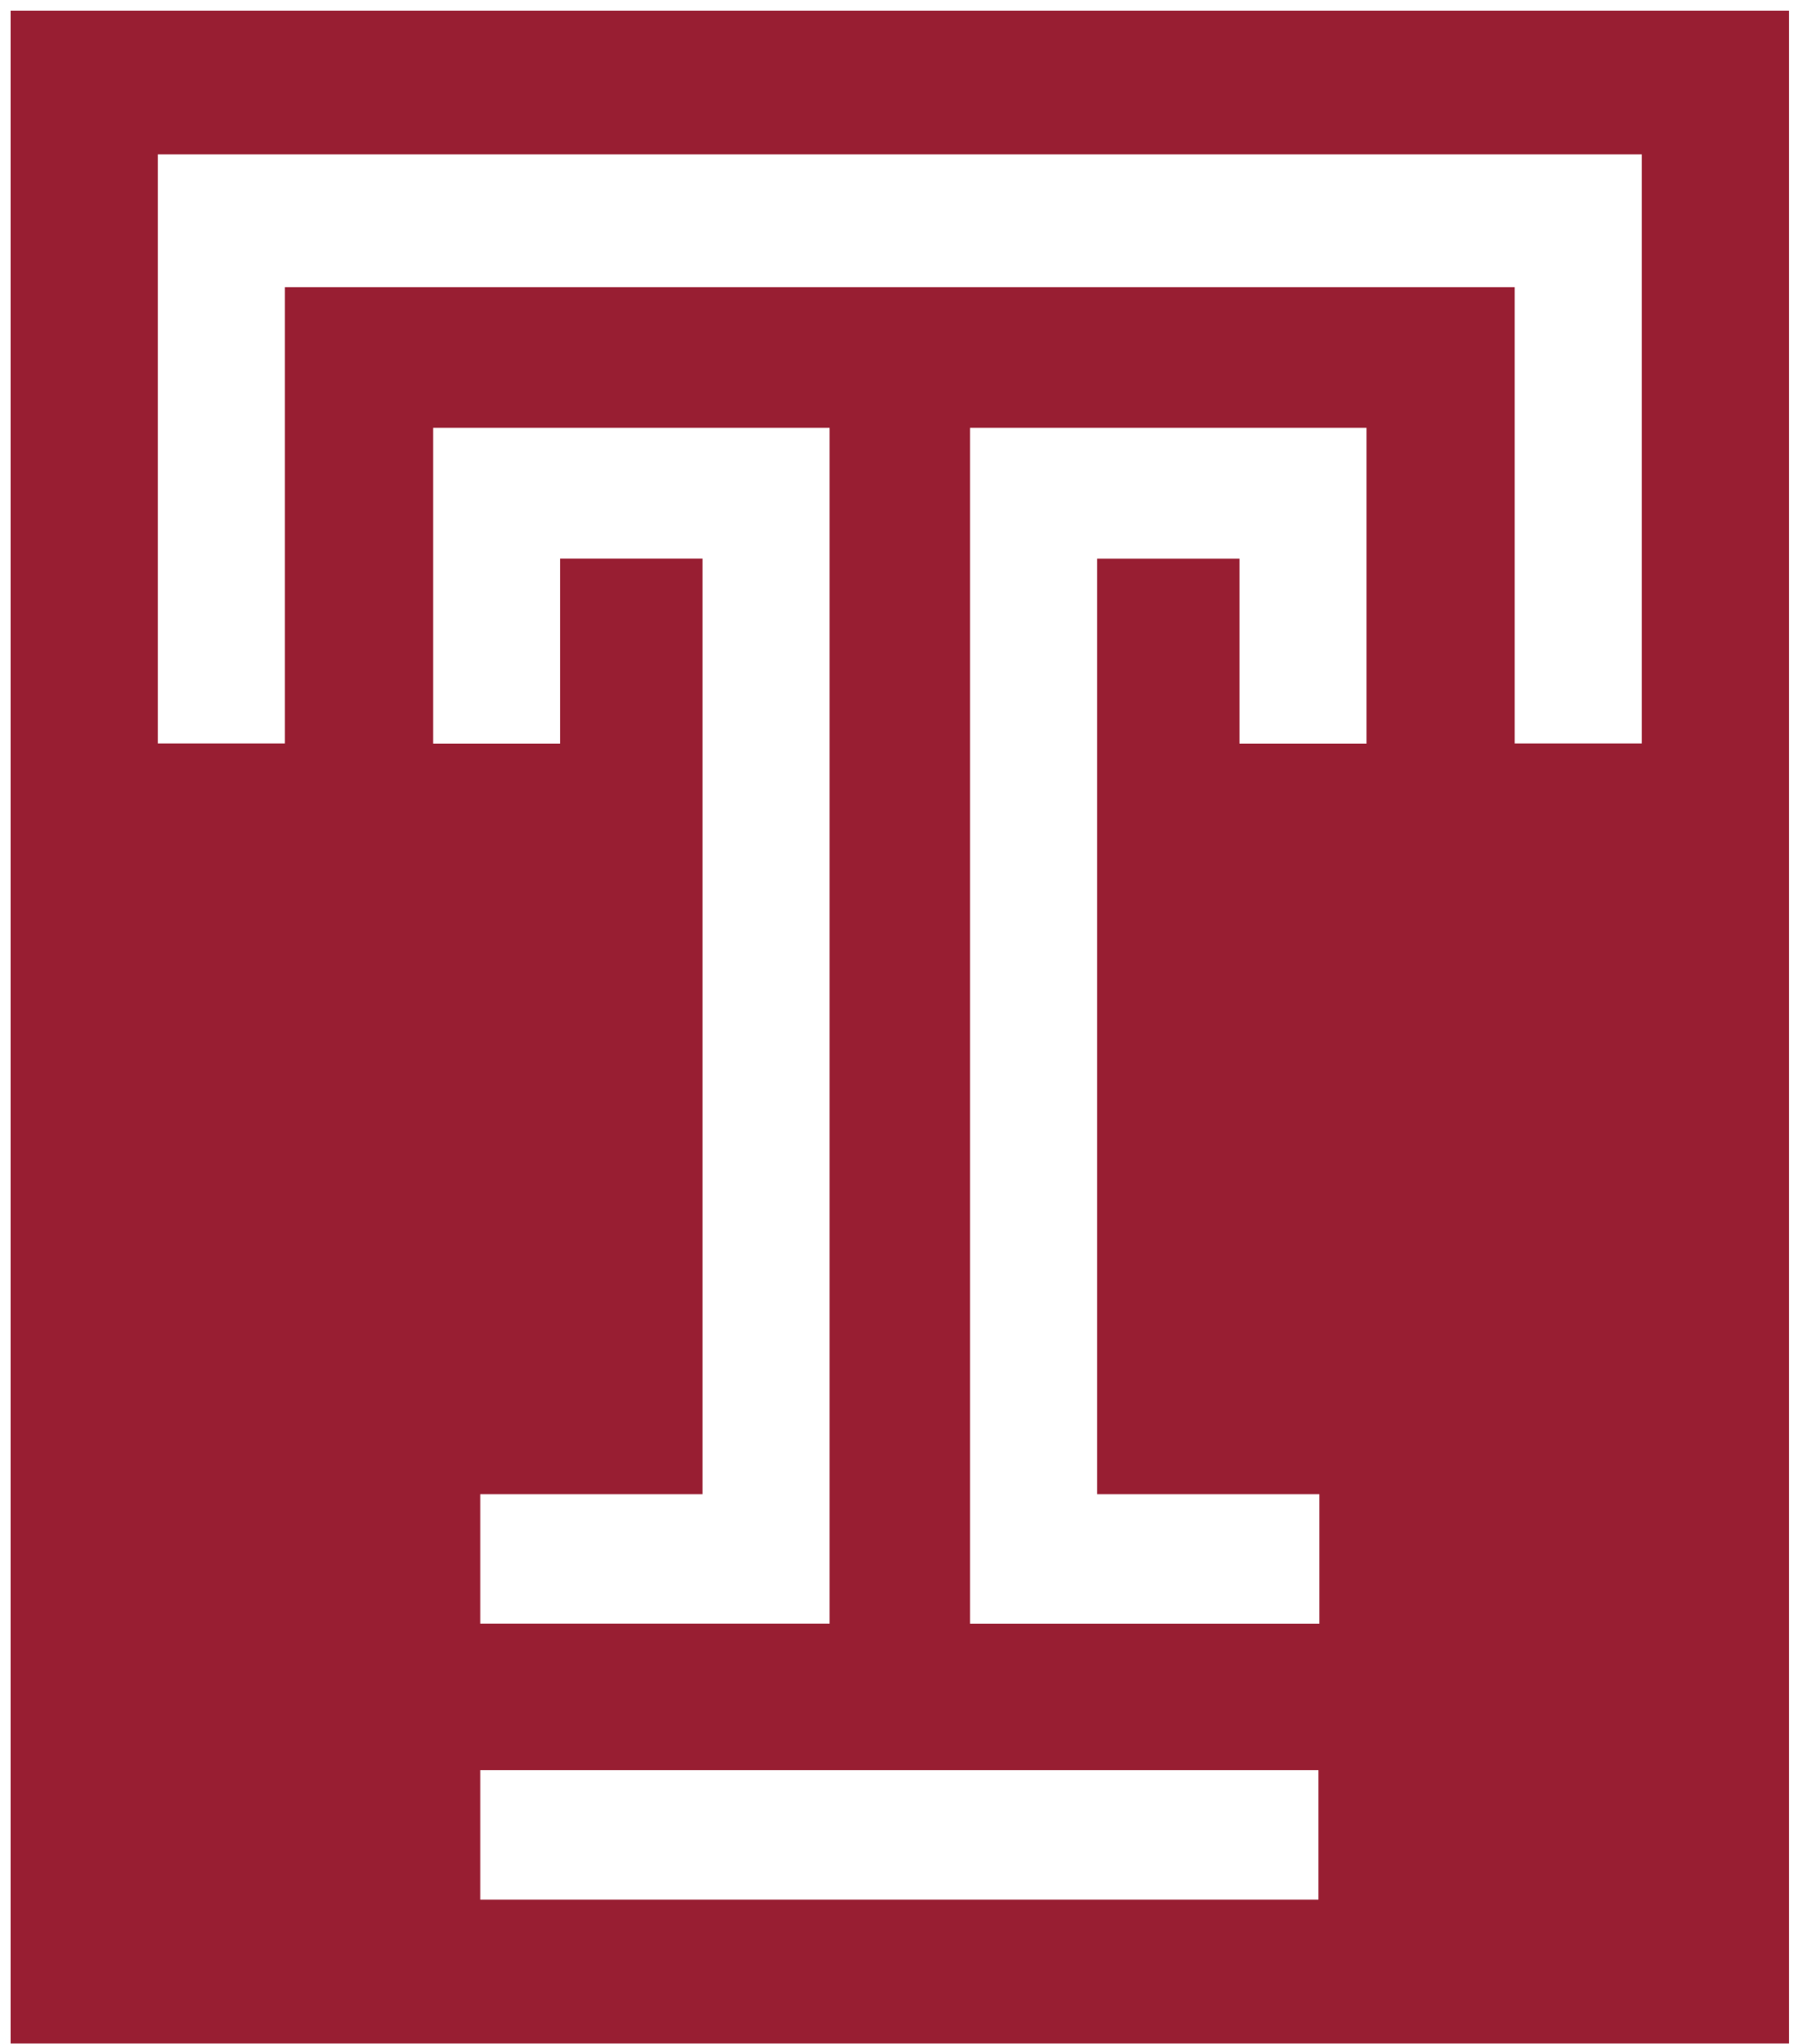 Red T Logo - Temple Owls football statistical leaders